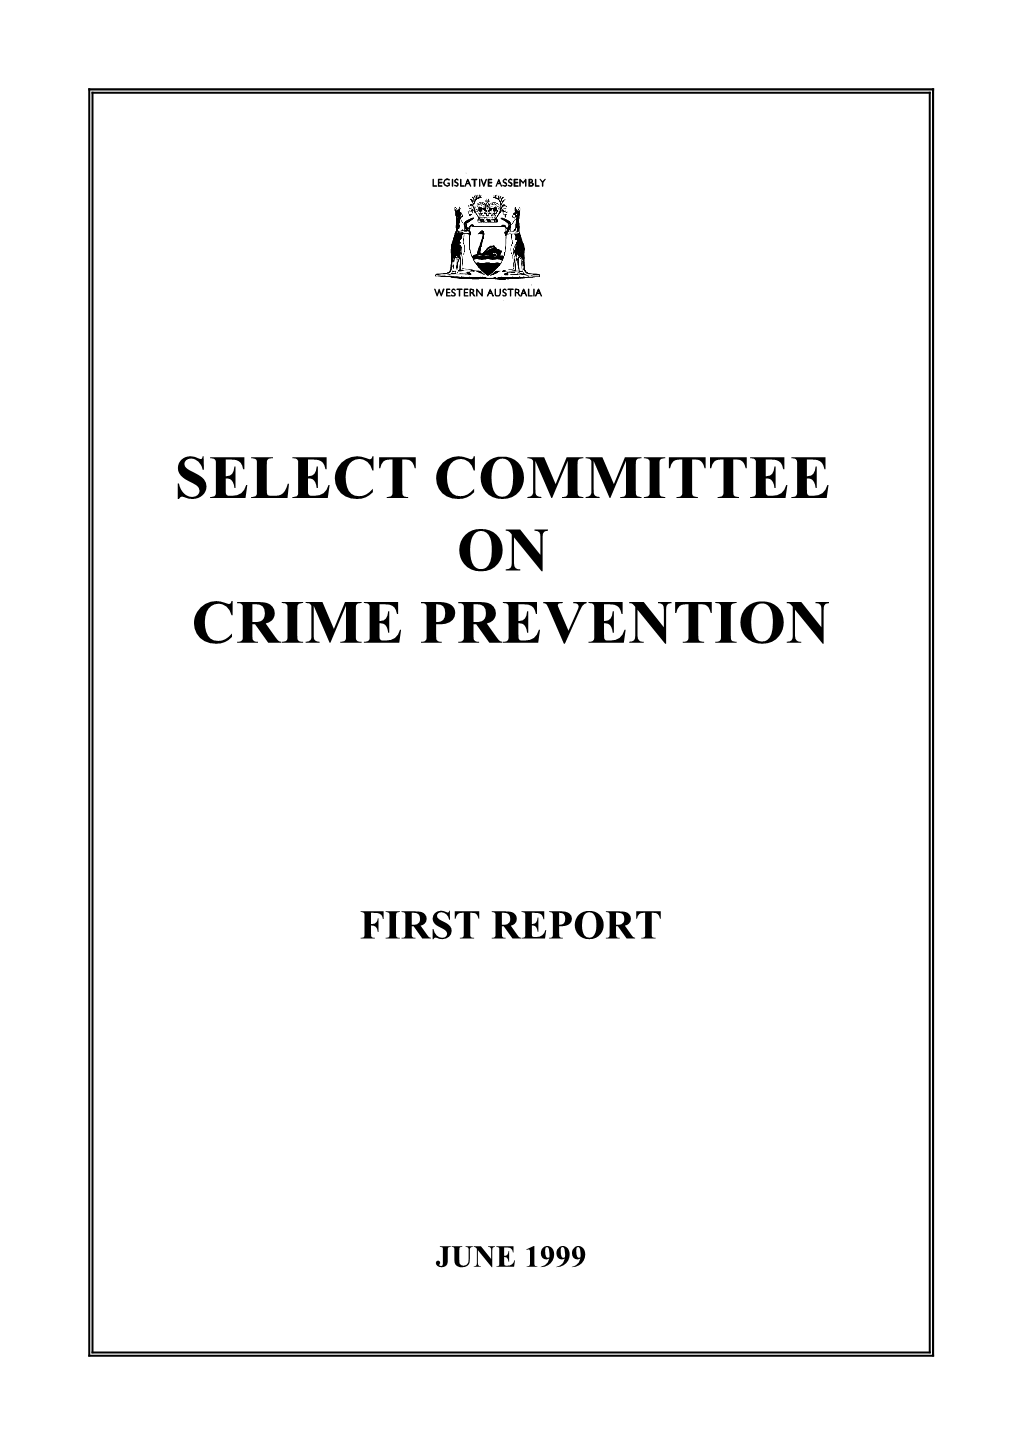 Select Committee on Crime Prevention